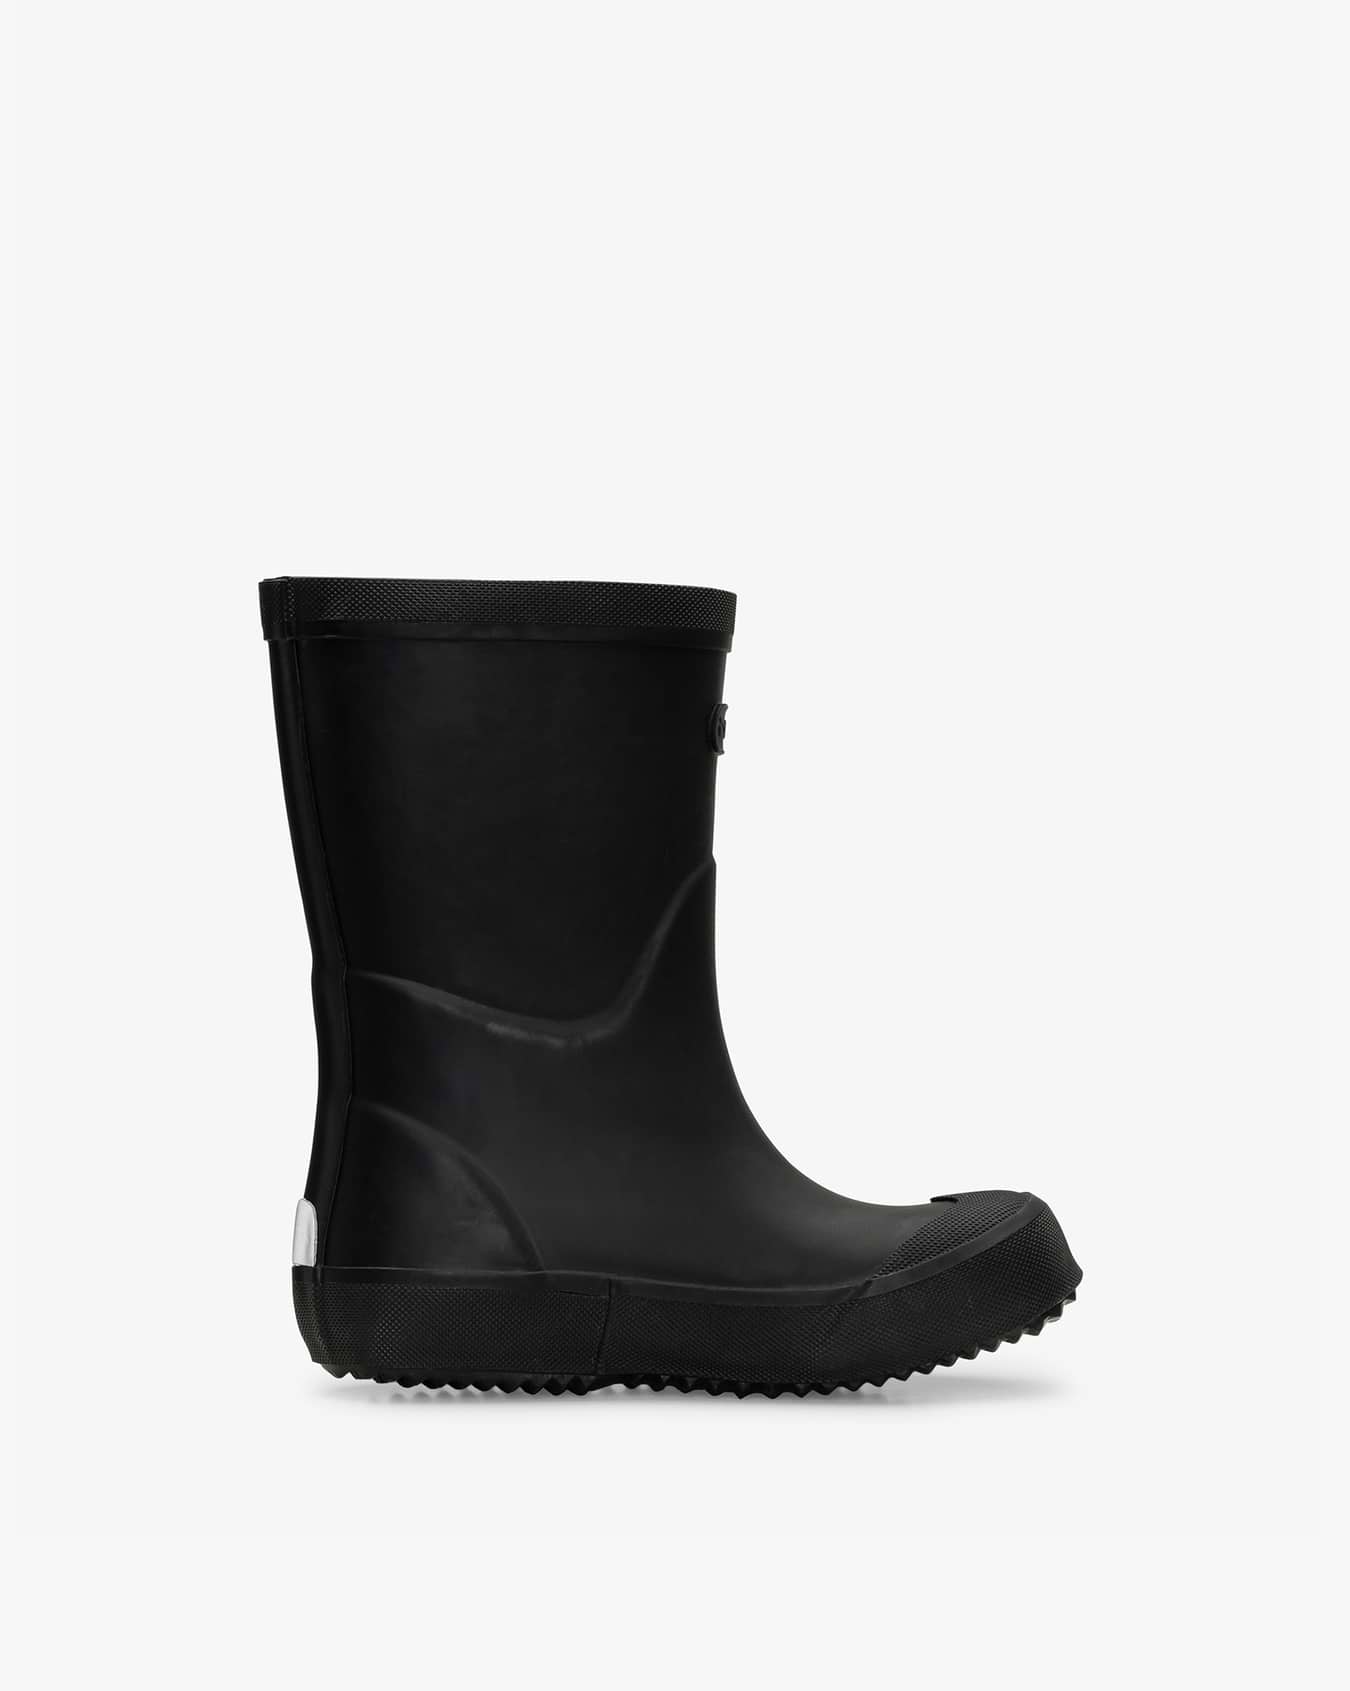 Classic Indie Black Rubber Boot